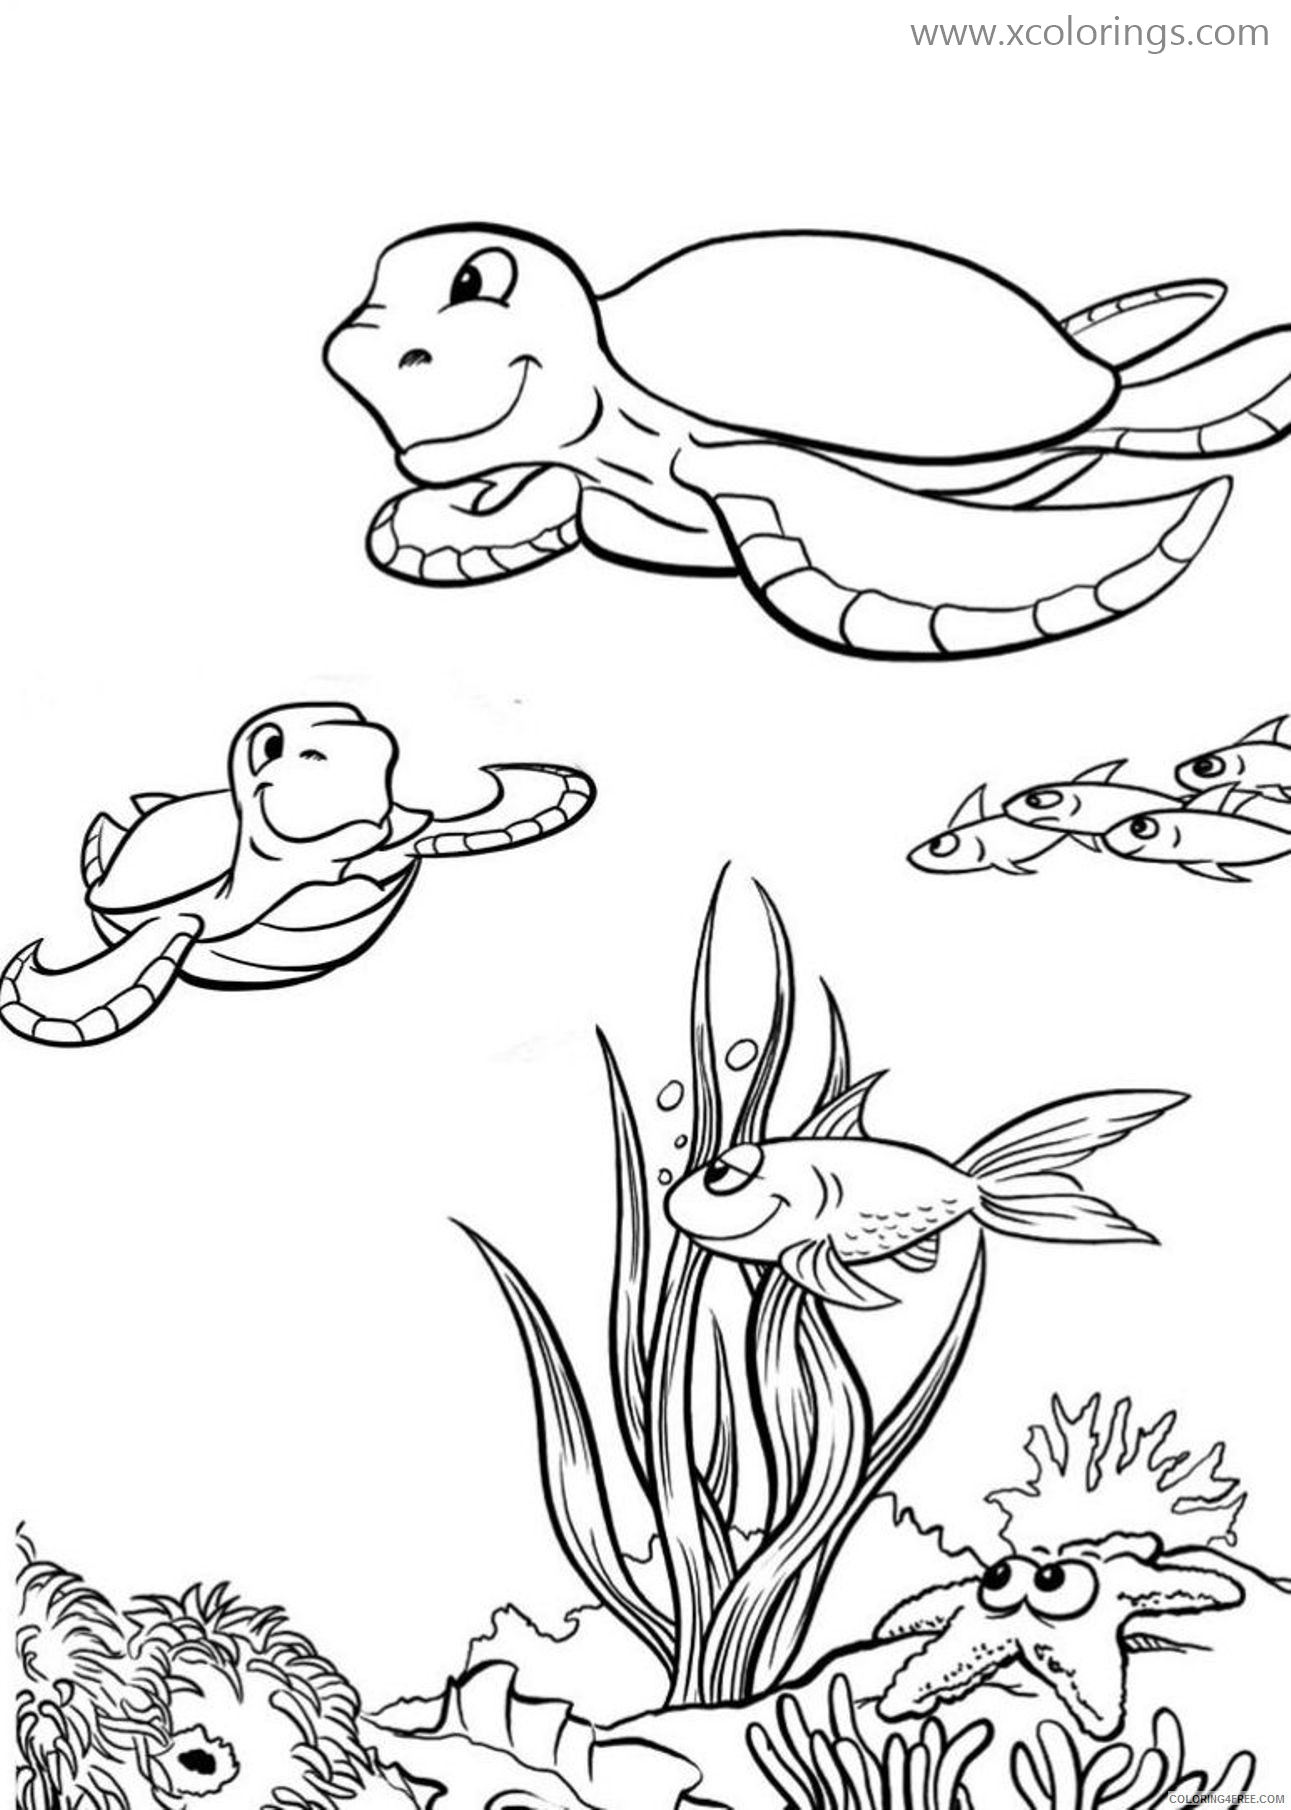 Free Sea Turtle Coloring Pages with Fishes printable